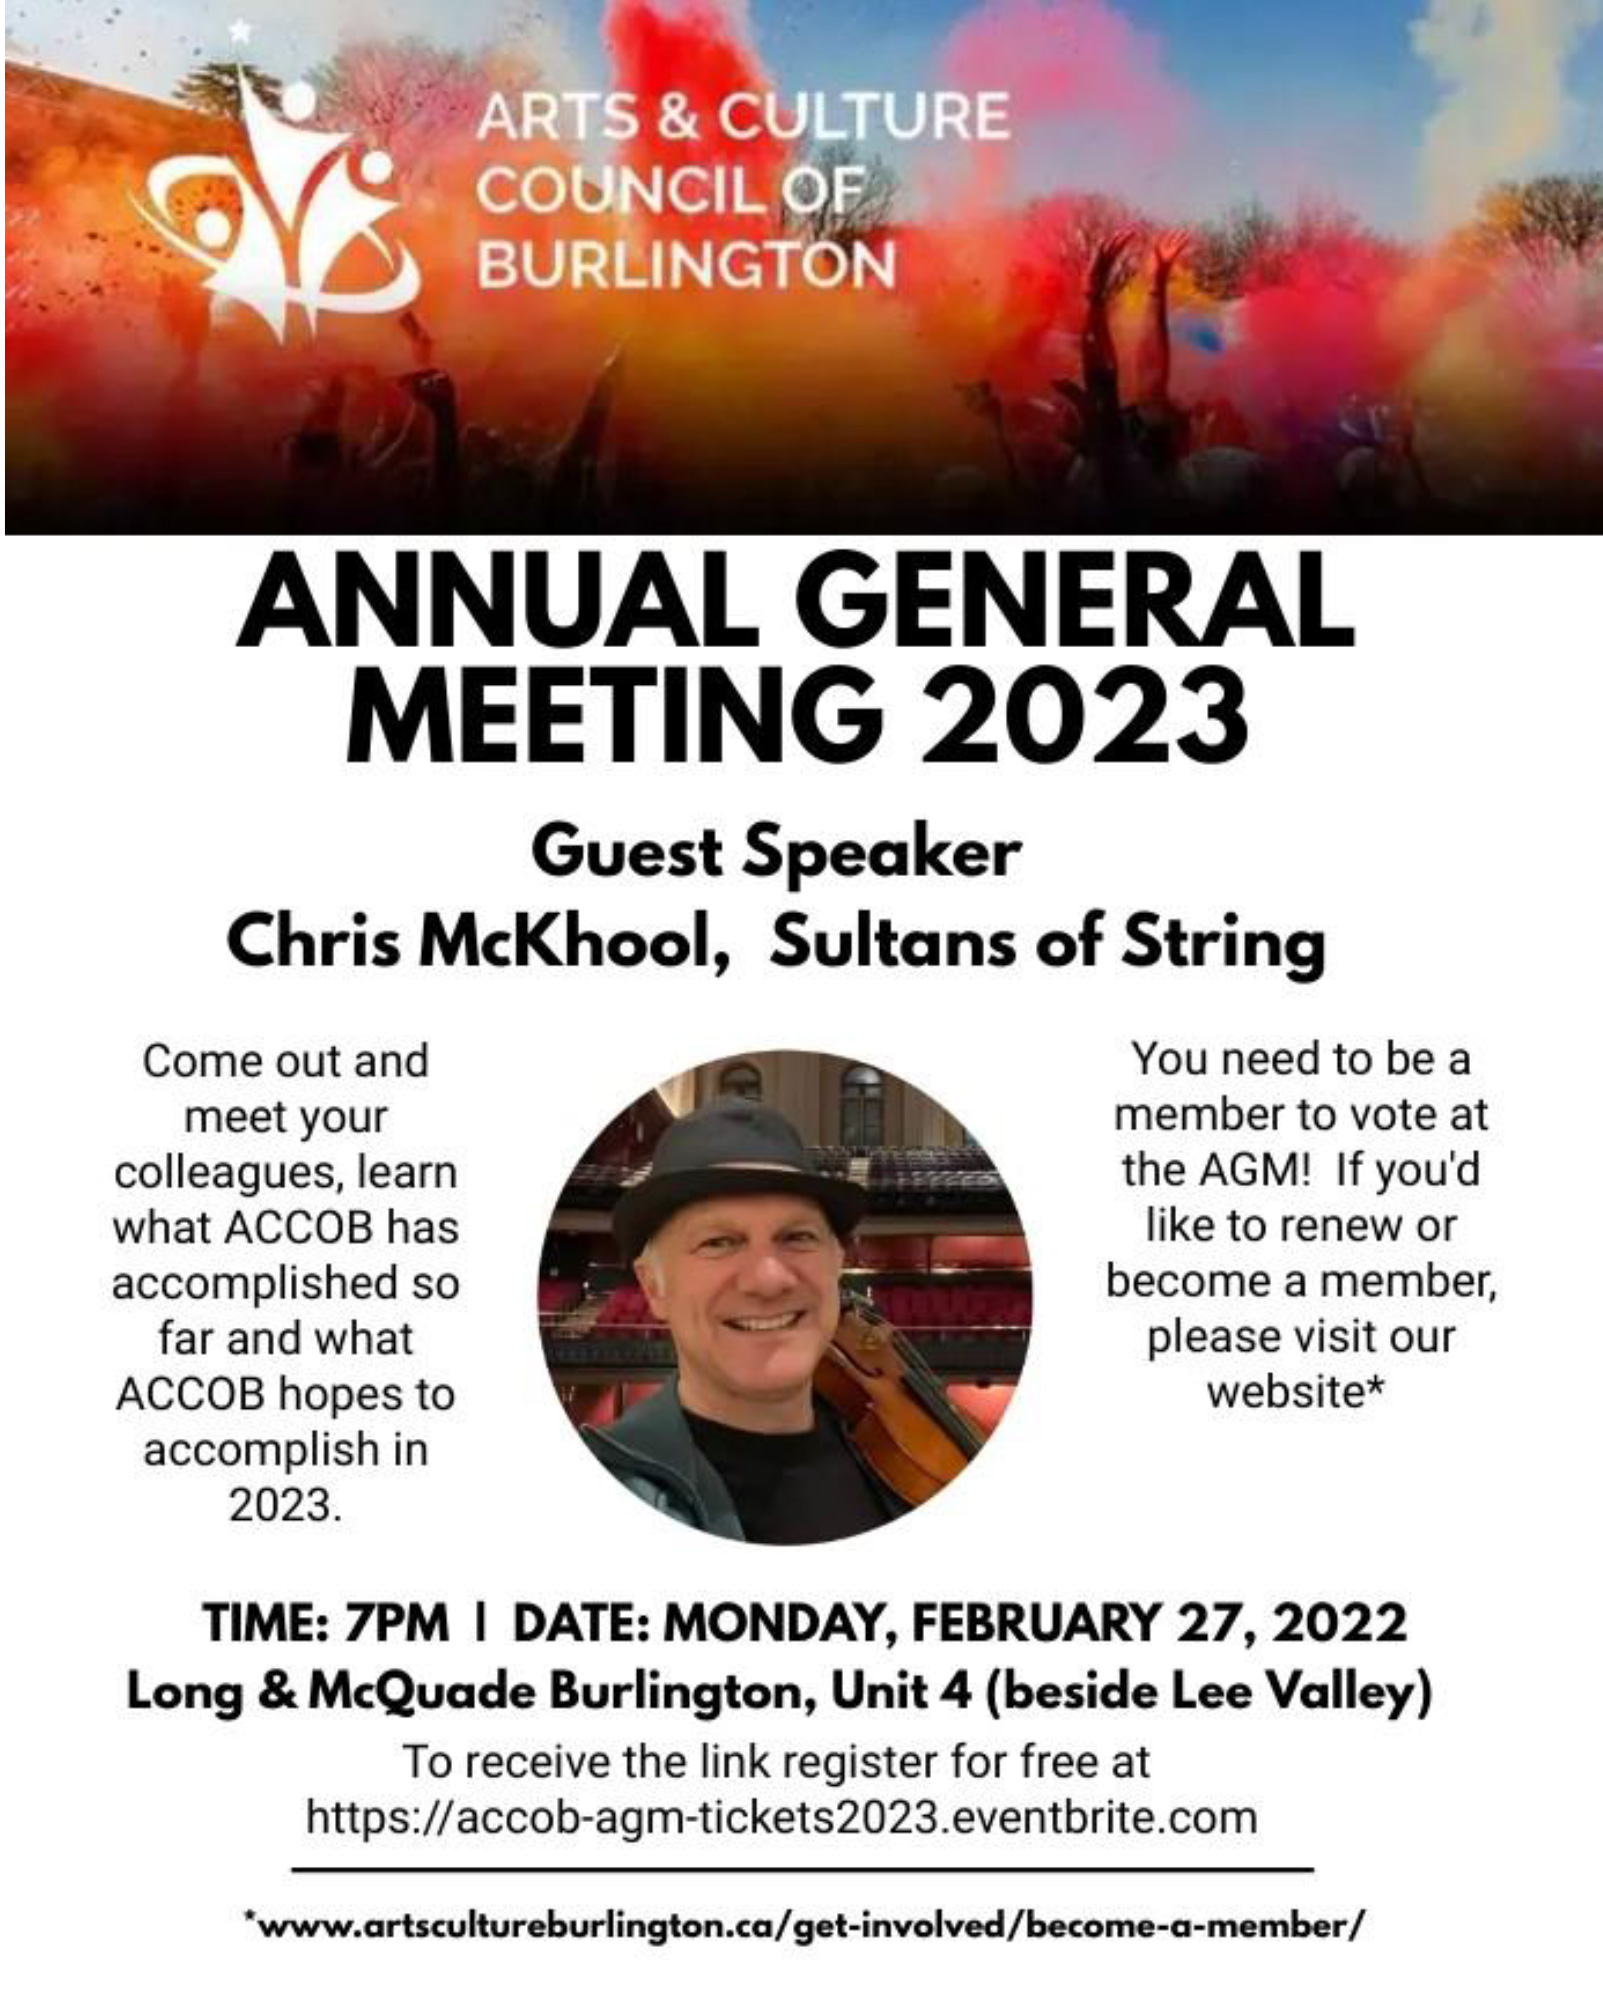 This year’s AGM will be held in person at Long & McQuade Burlington. Guest speaker Chris McKhool from Sultans of String.